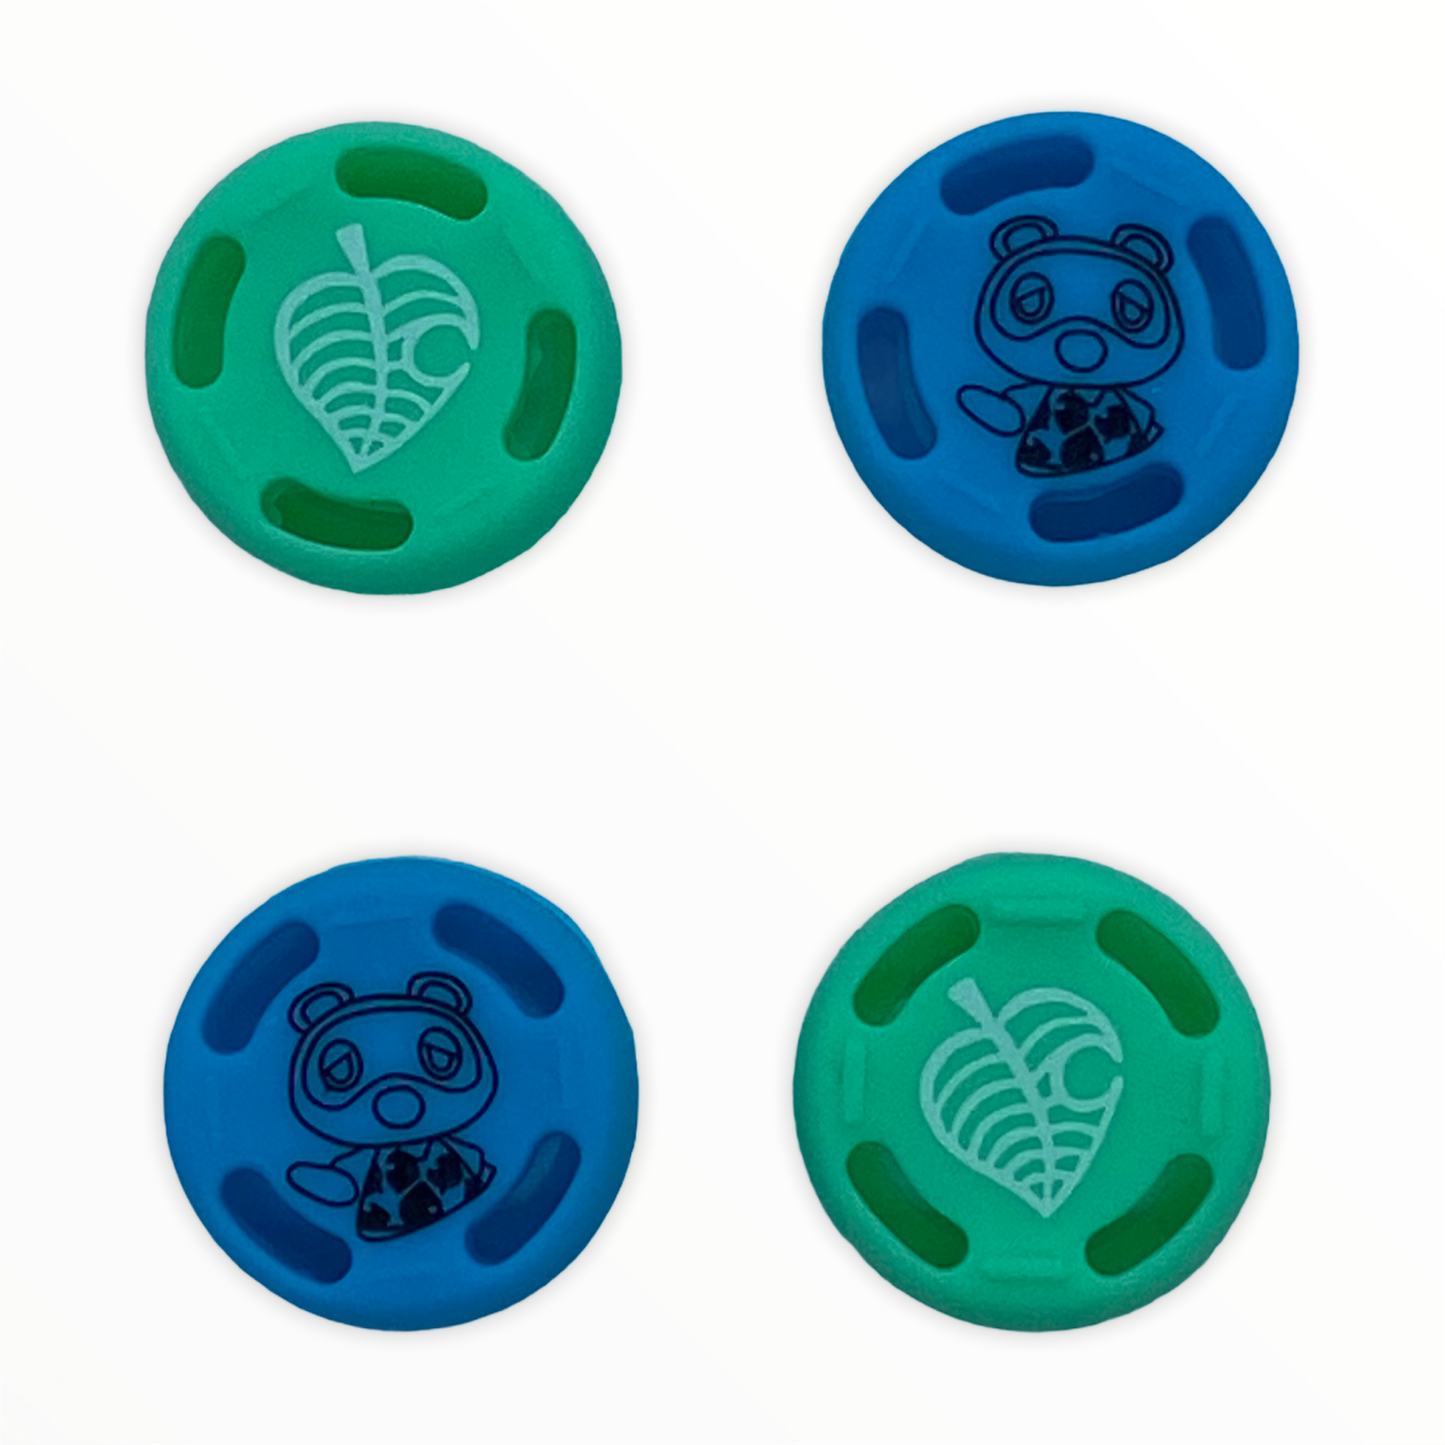 JenDore Green & Blue 4Pcs Animal Crossing Leaf Raccoon Silicone Thumb Grip Caps for Nintendo Switch